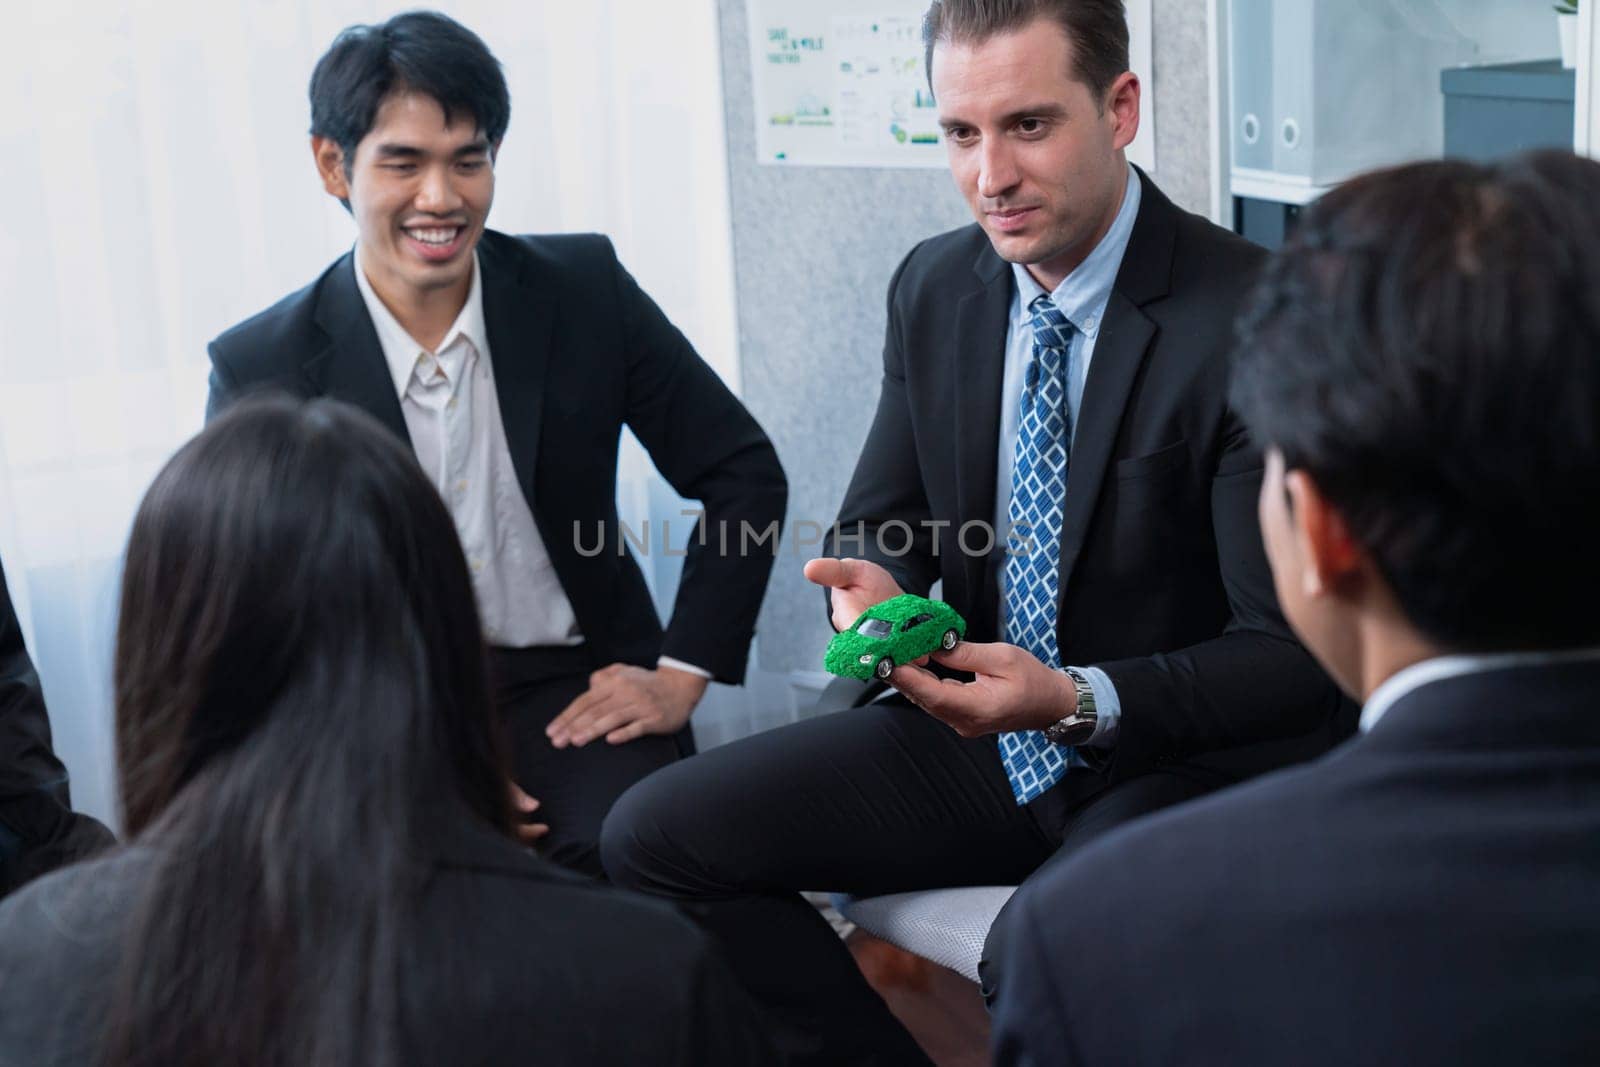 Group of business people discussing strategic marketing in electric car company meeting for eco-friendly EV car using sustainable and alternative power contribute to greener future. Quaint